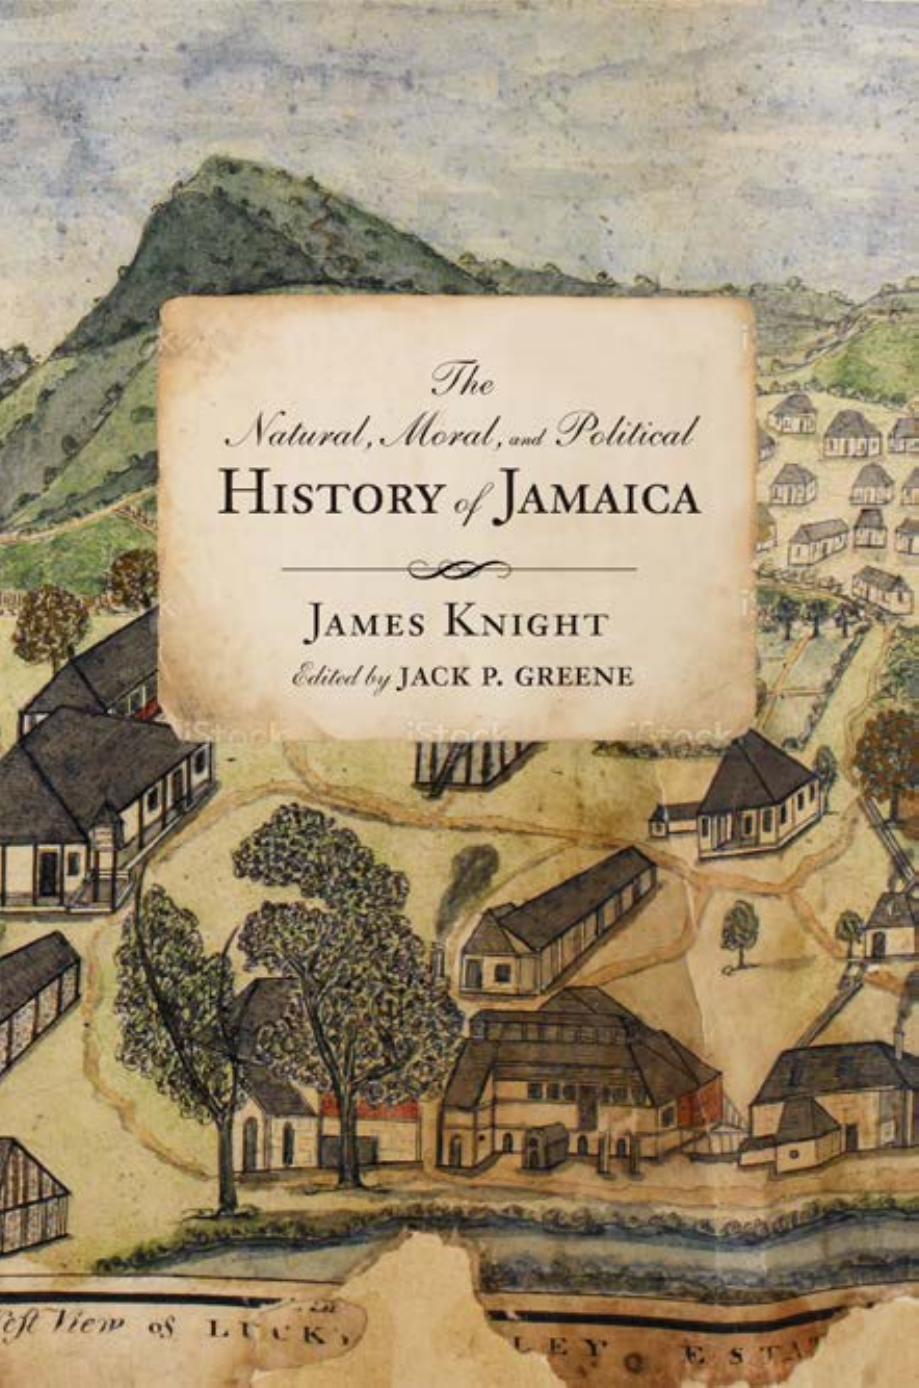 The Natural, Moral, and Political History of Jamaica, and the Territories thereon Depending: From the First Discovery of the Island by Christopher Columbus to the Year 1746 by James Knight; Jack P. Greene